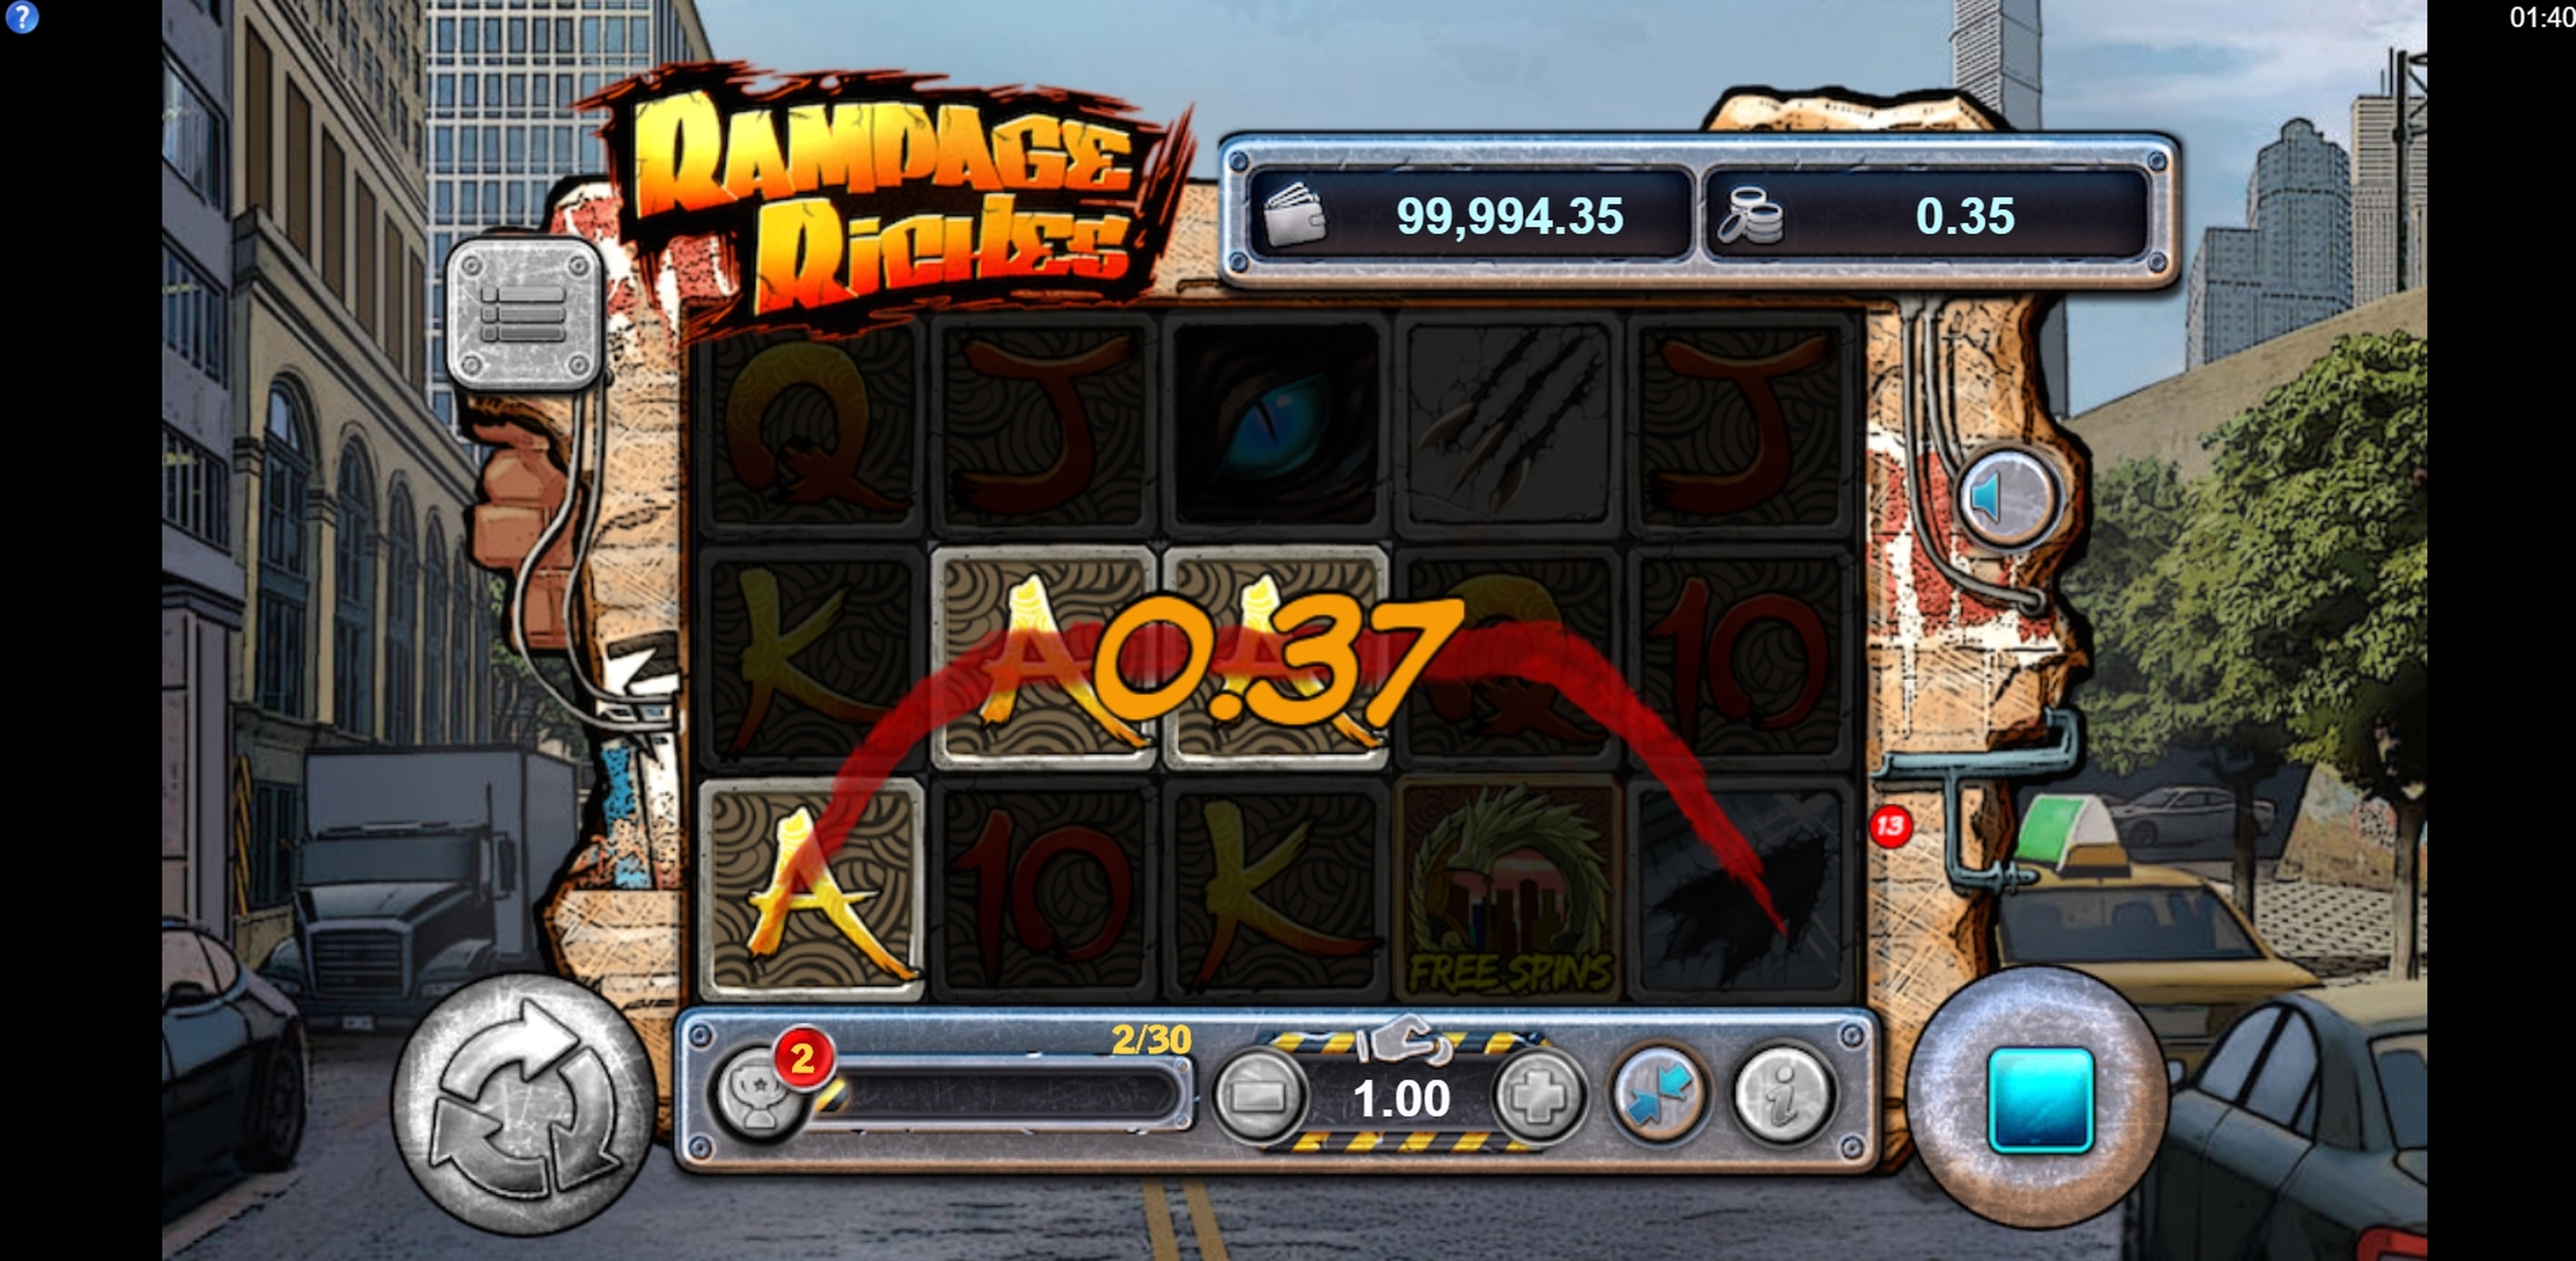 Win Money in King of Kaiju: Rampage Riches Free Slot Game by Lost World Games